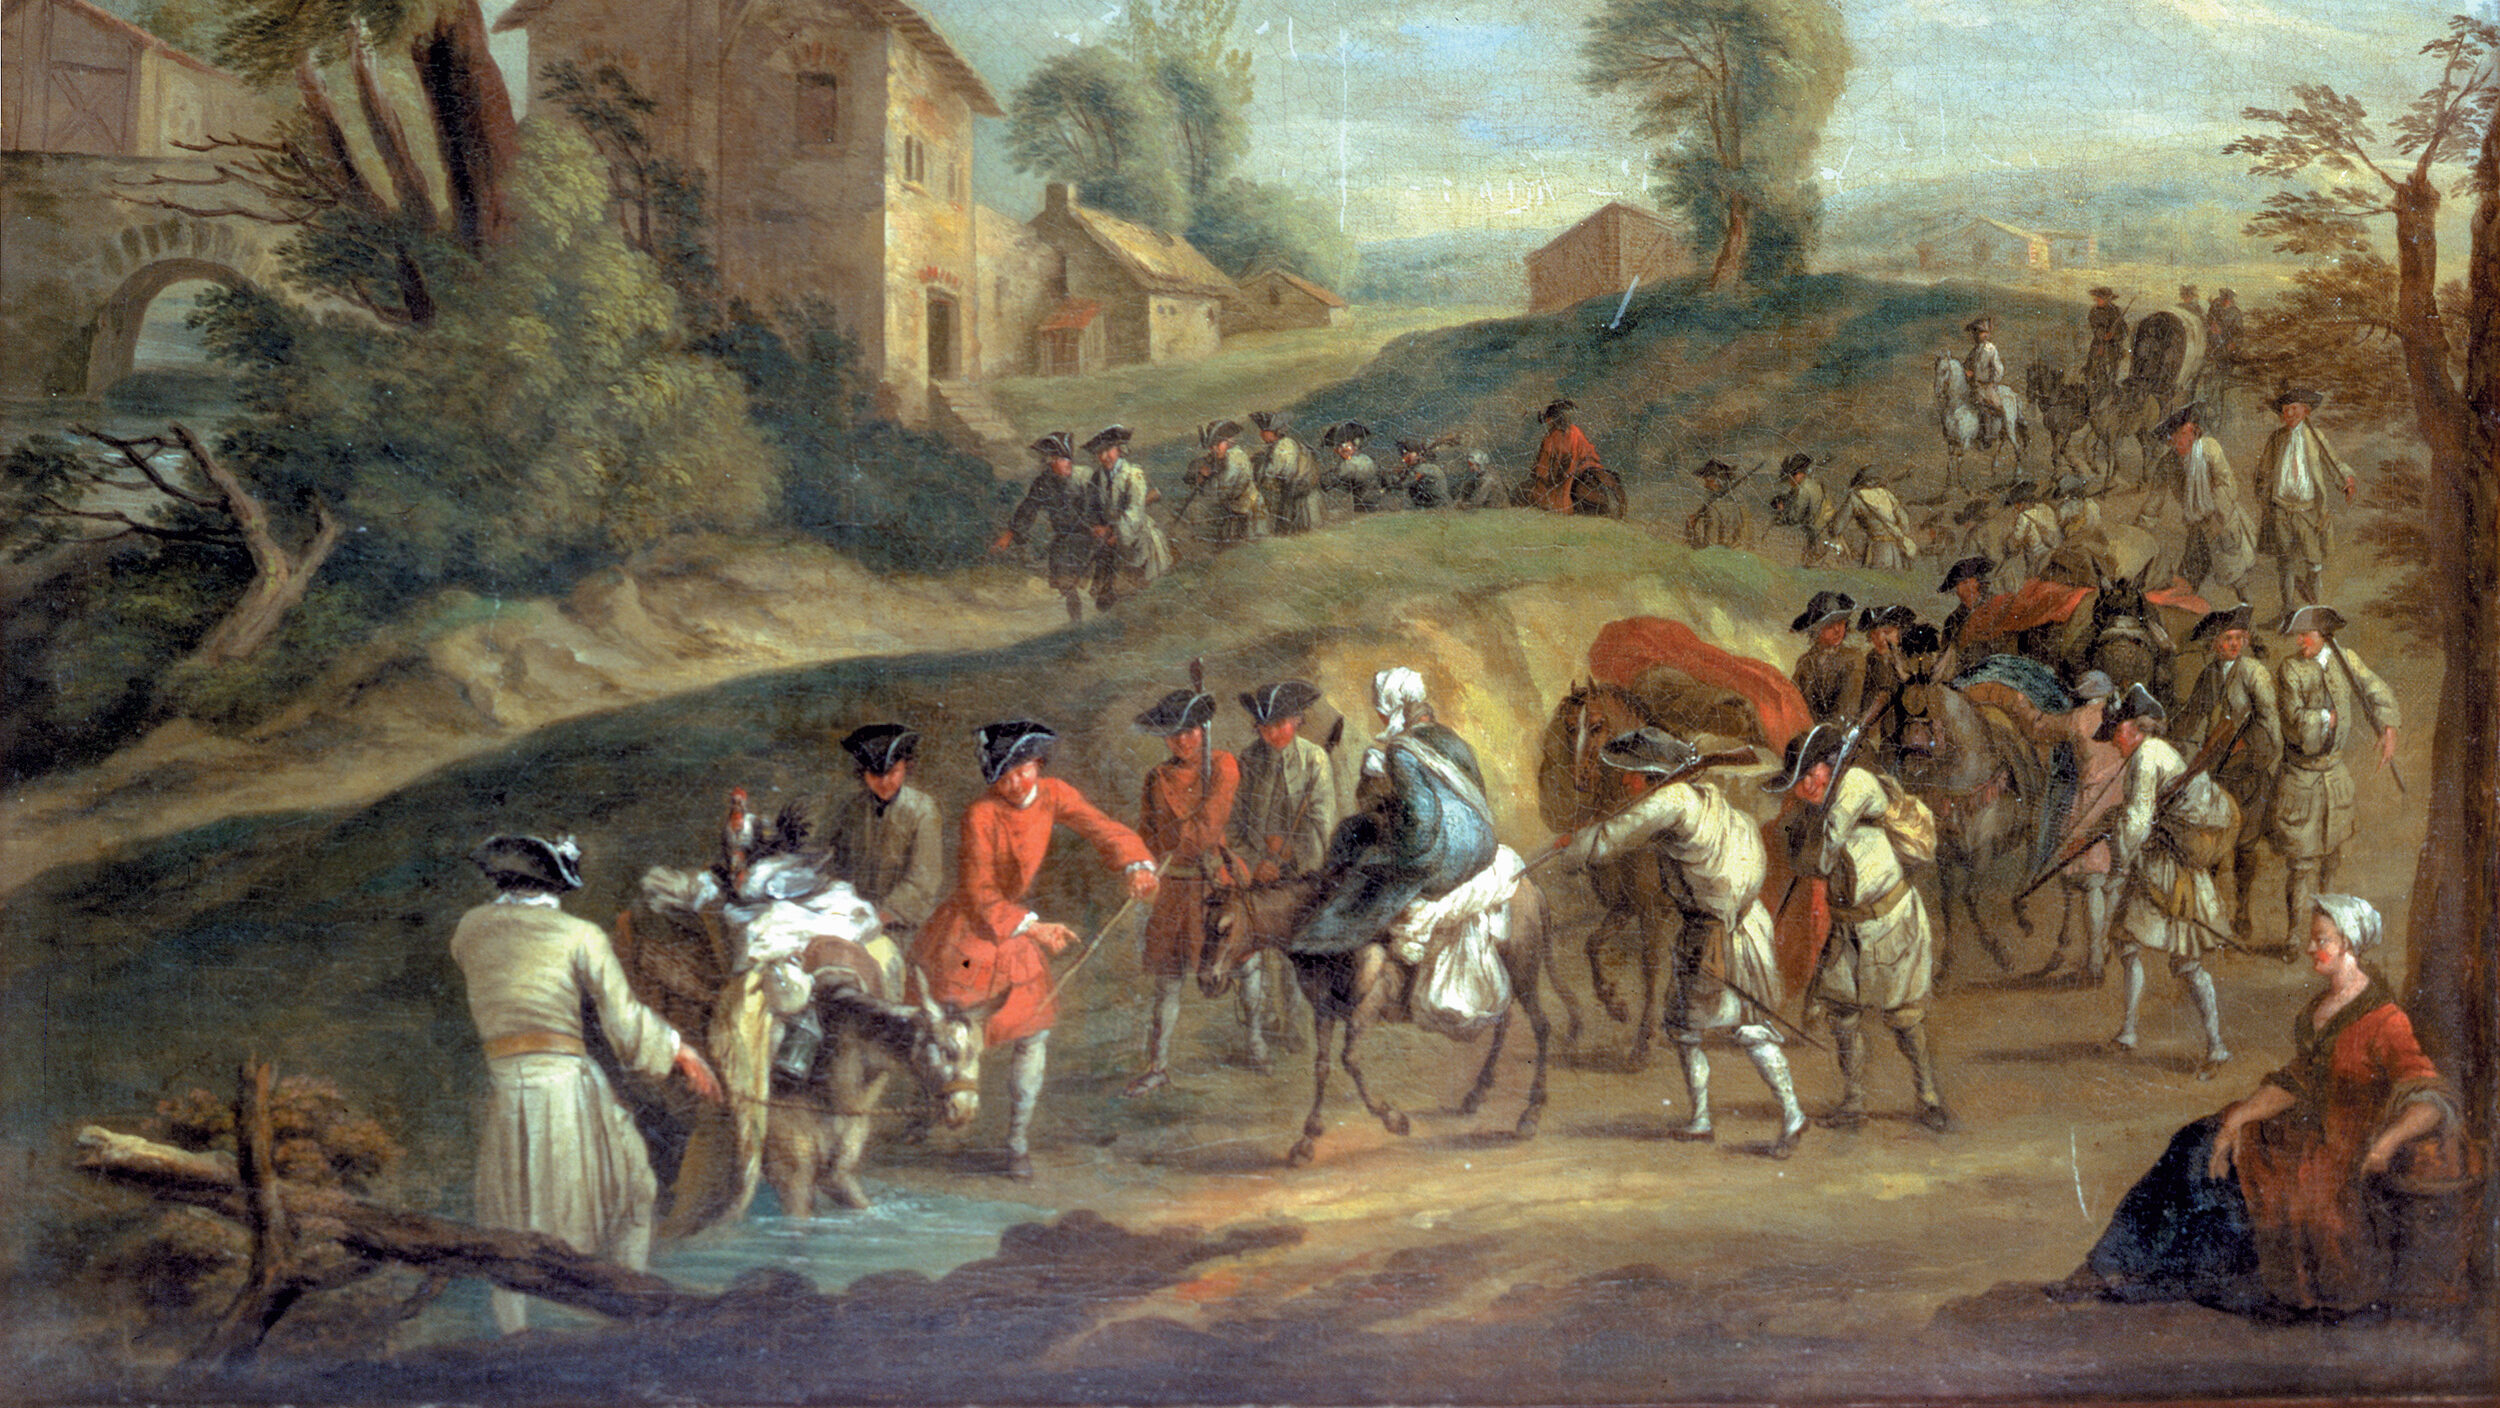 A painting by Jean Watteau (1684-1721) shows French infantry on the march, complete with donkeys and camp followers.